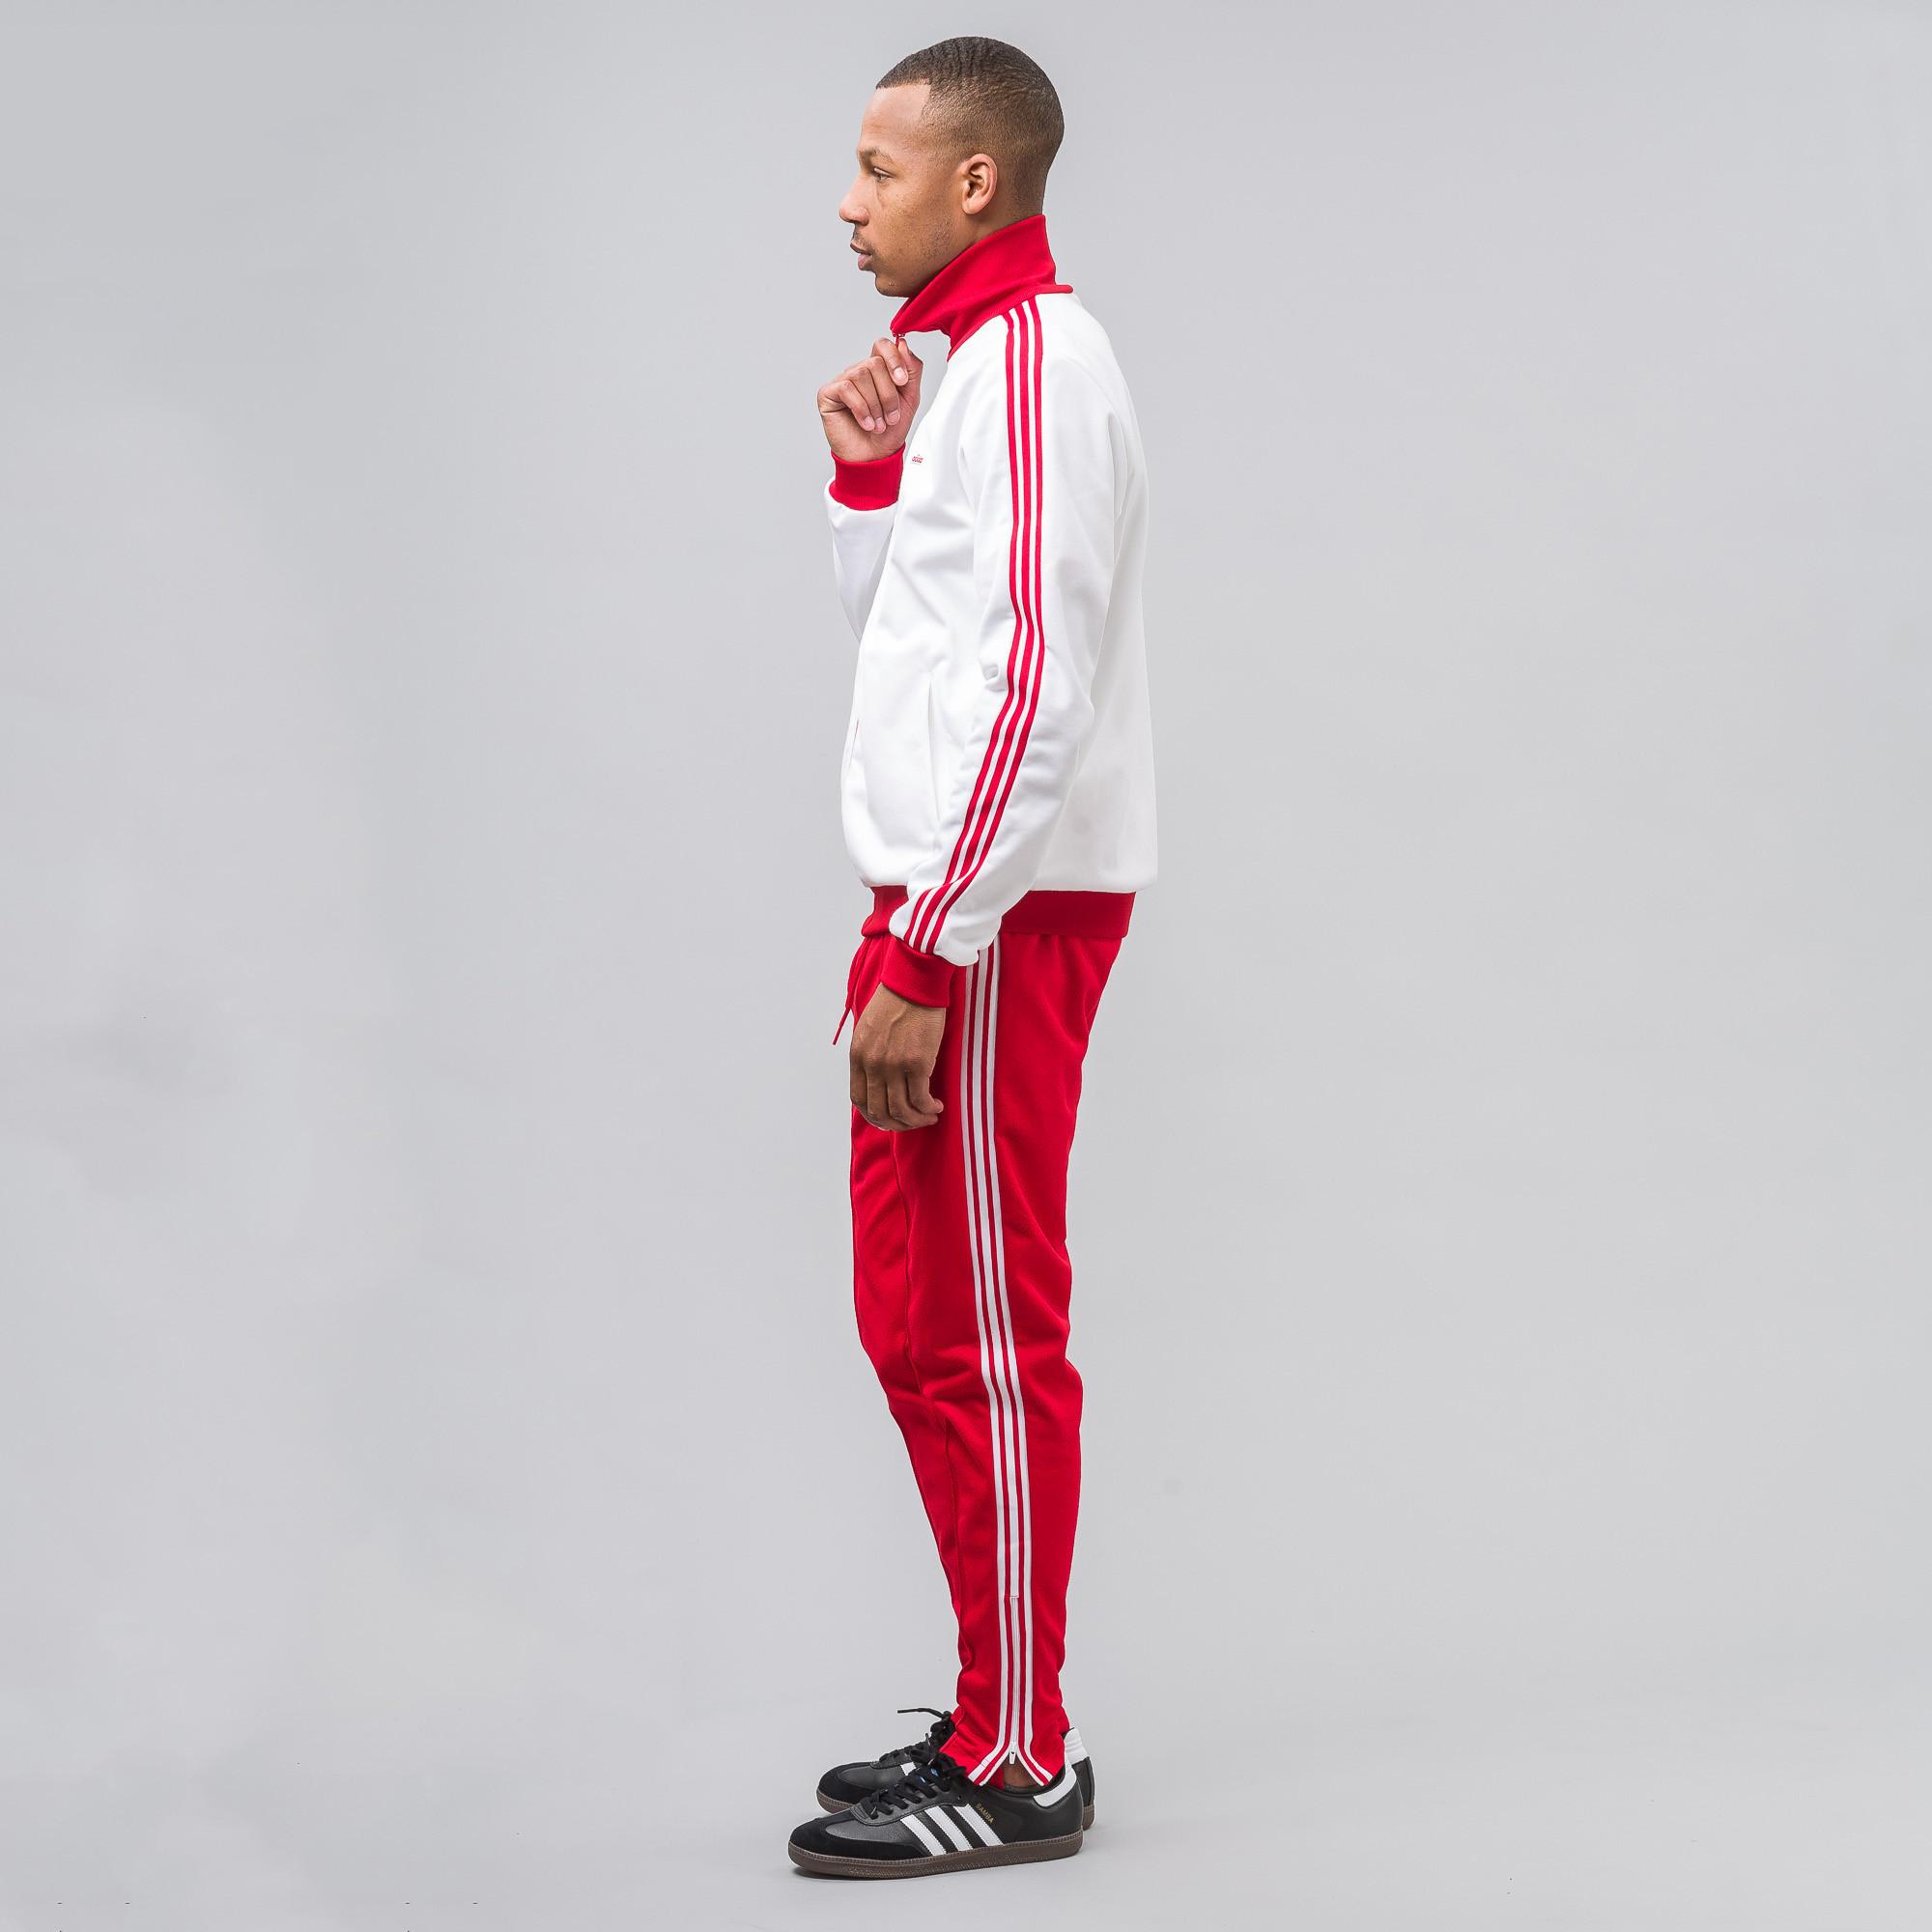 adidas Originals Beckenbauer Mig Tracksuit in Red/White (Red) for Men | Lyst